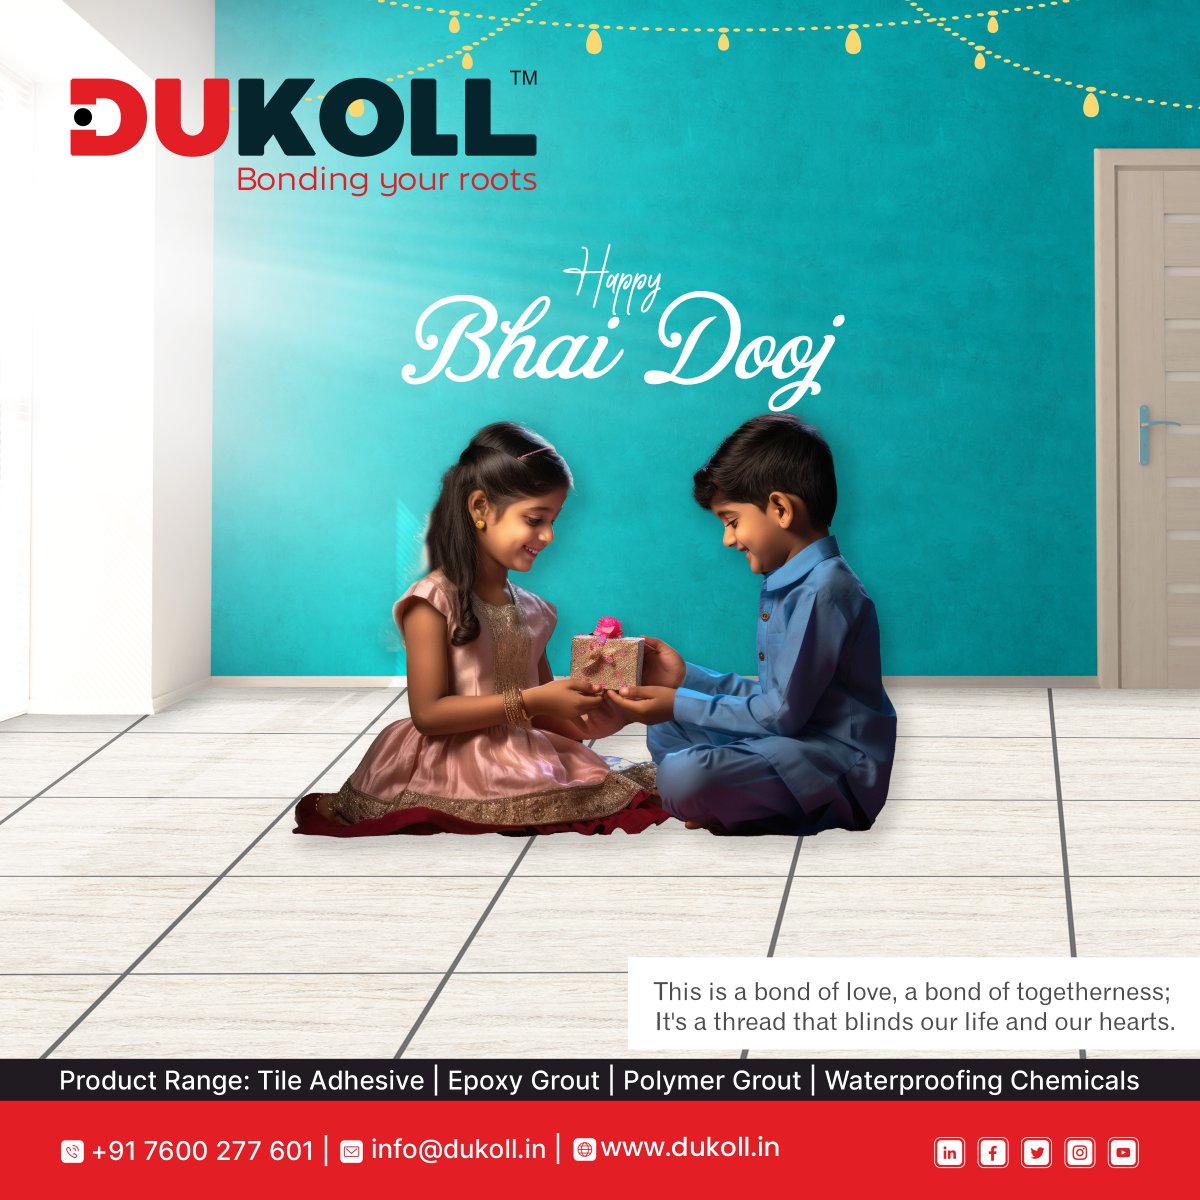 Cherishing the beautiful bond that grows stronger with time. Happy Bhai Dooj to all the wonderful brothers and sisters out there!

#BhaiDooj #SiblingLove #Bhaidooj2023 #CelebratingBond #dukoll #dukolladhesive #polymergrout #waterproofingchemical #buildingconstructions